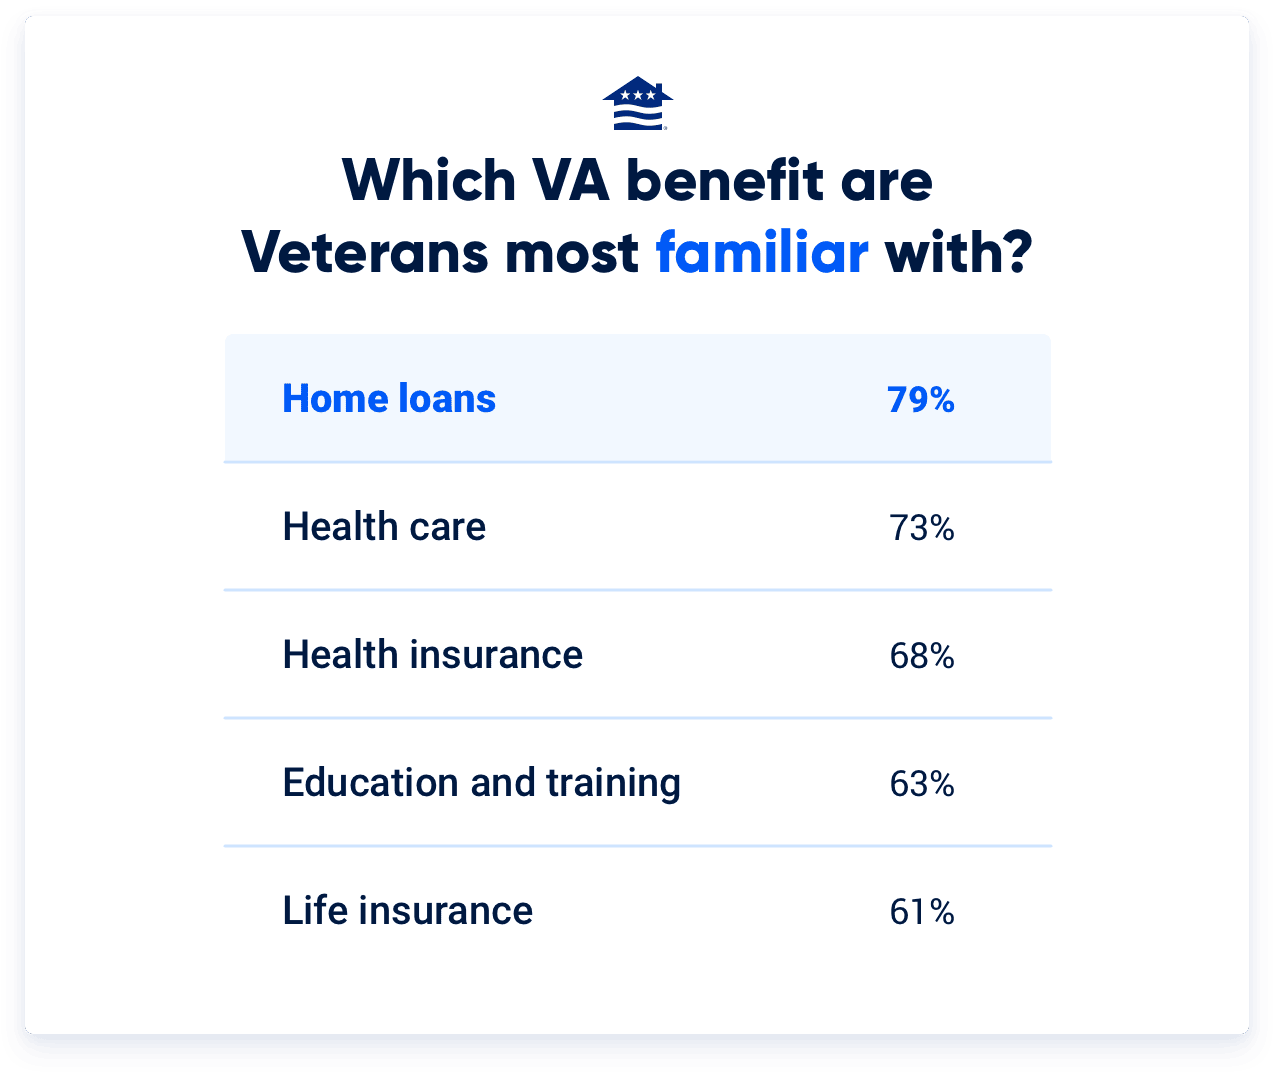 The home loan benefit ranks first among Veterans and service members in terms of both satisfaction and knowledge.